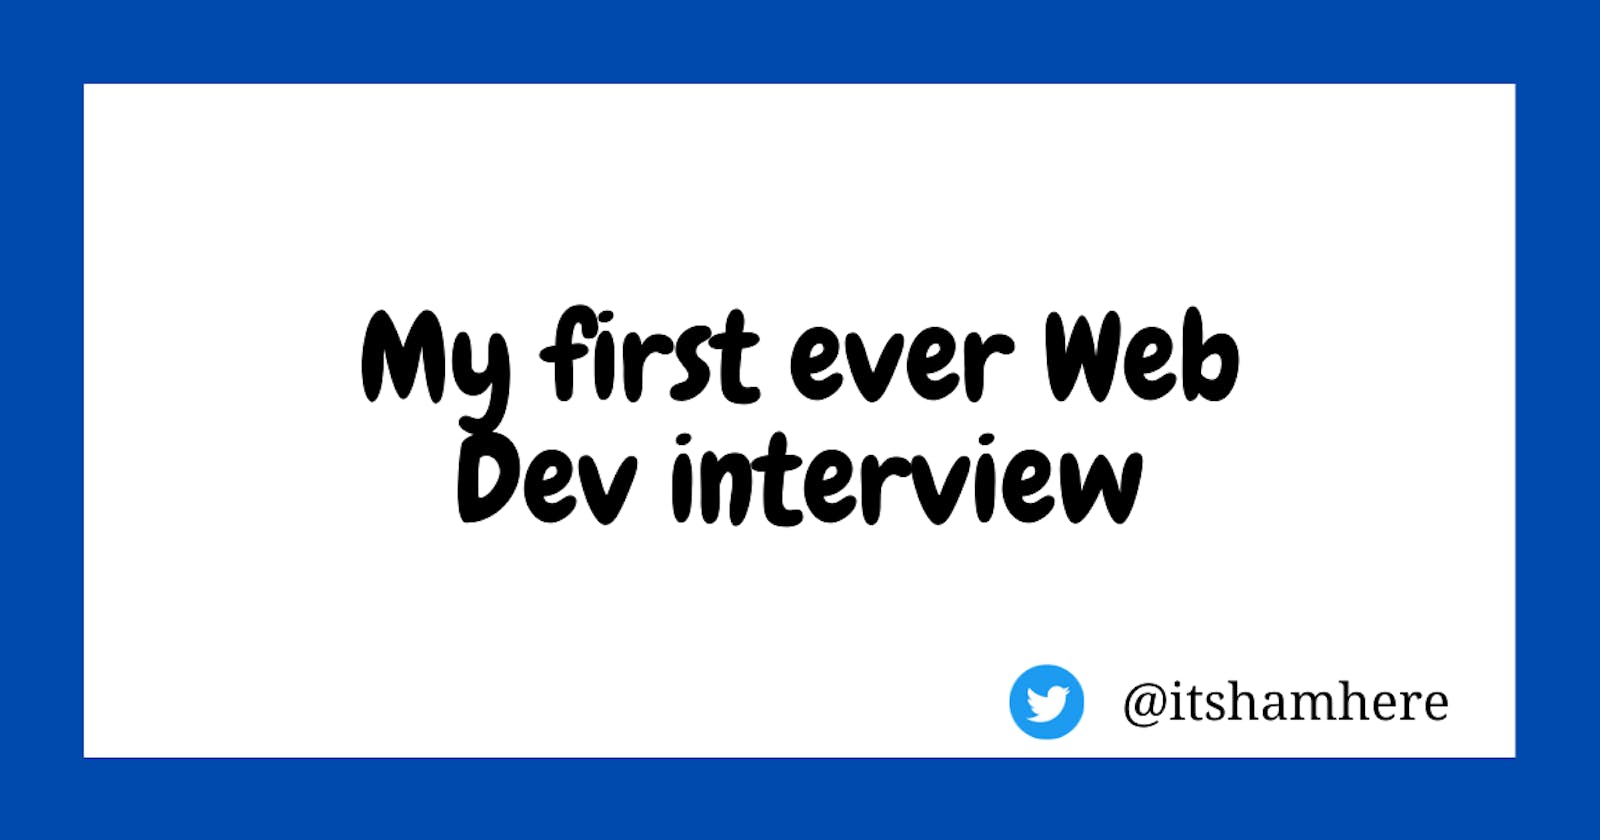 My first ever Web Dev interview: Journey and Lessons learned